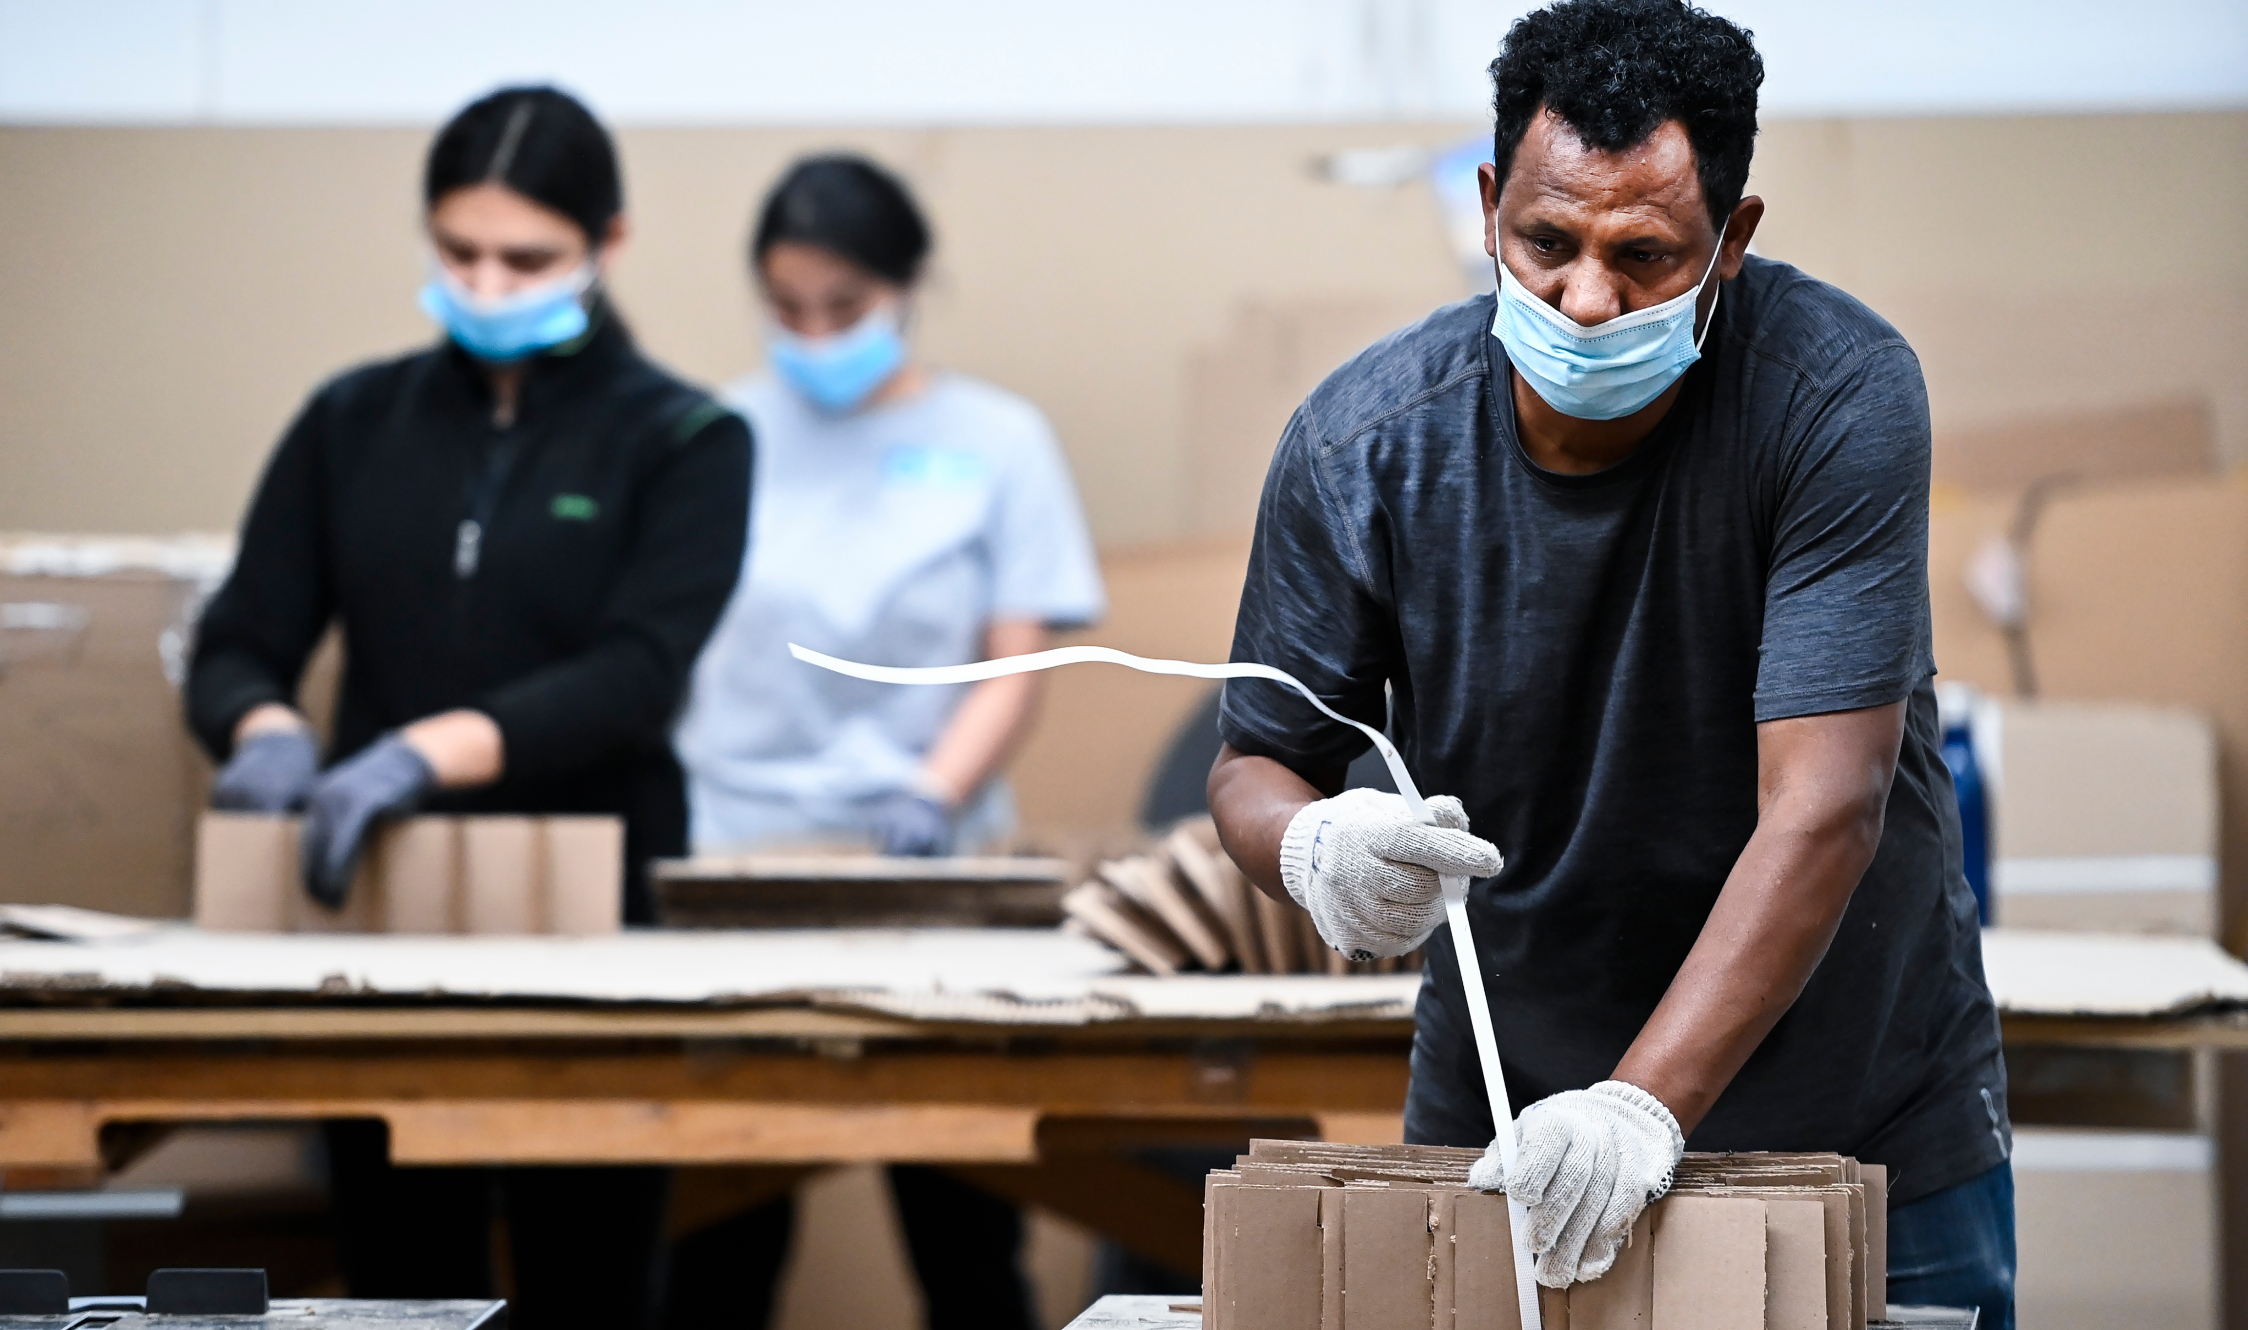 Masked, gloved workers package cardboard objects.